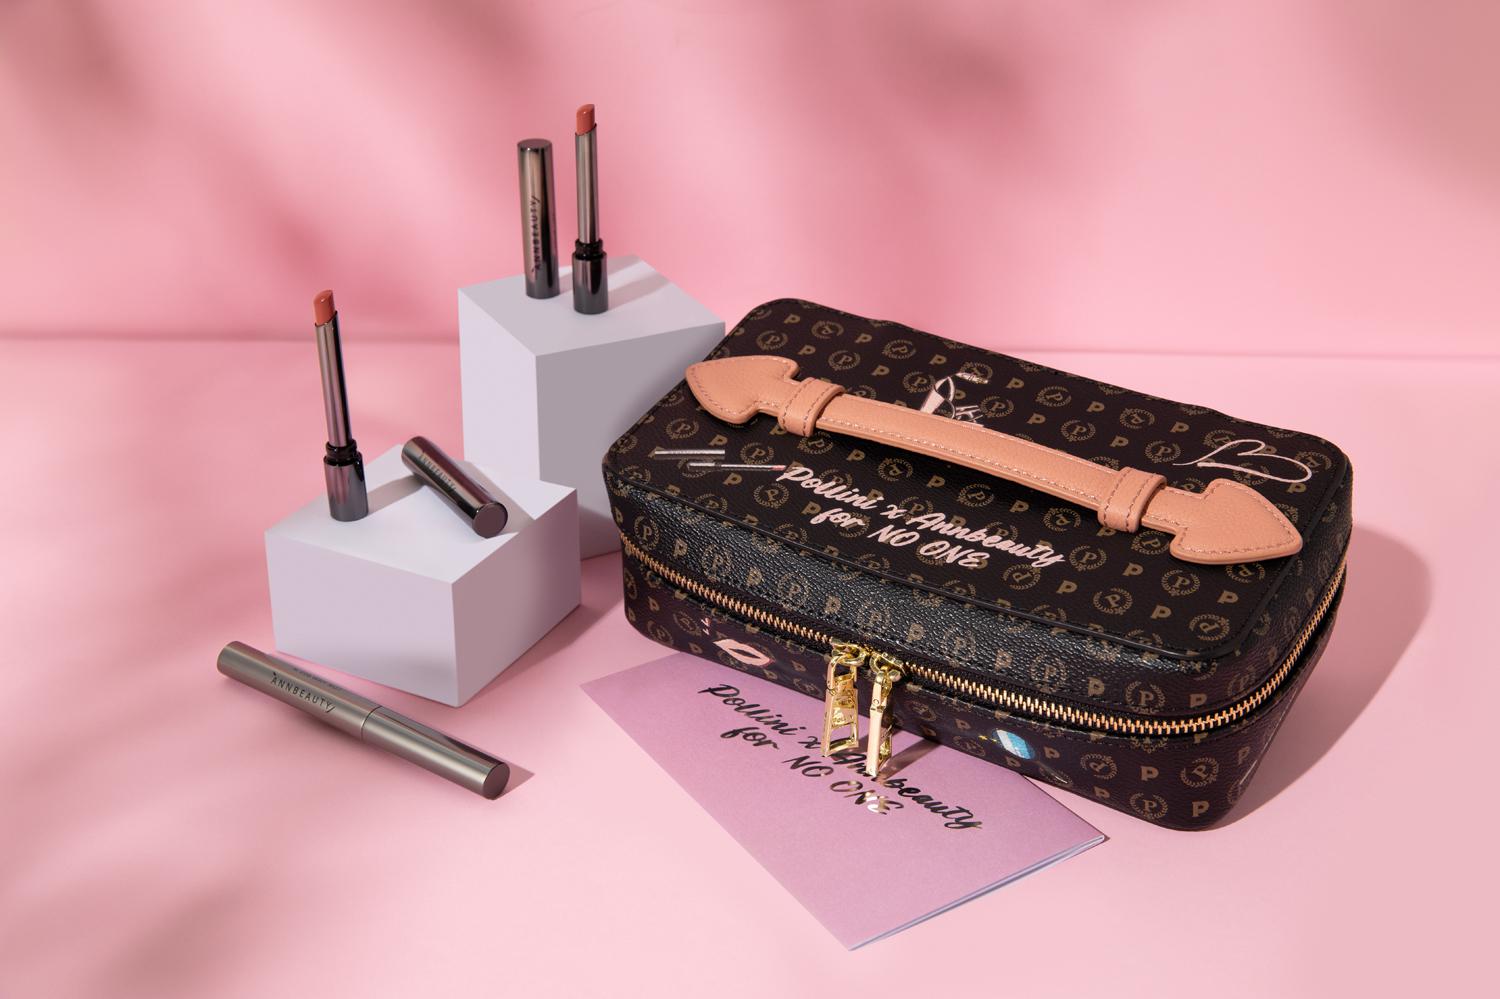 Limited set: Pollini cosmetic bag and Annbeauty lipsticks